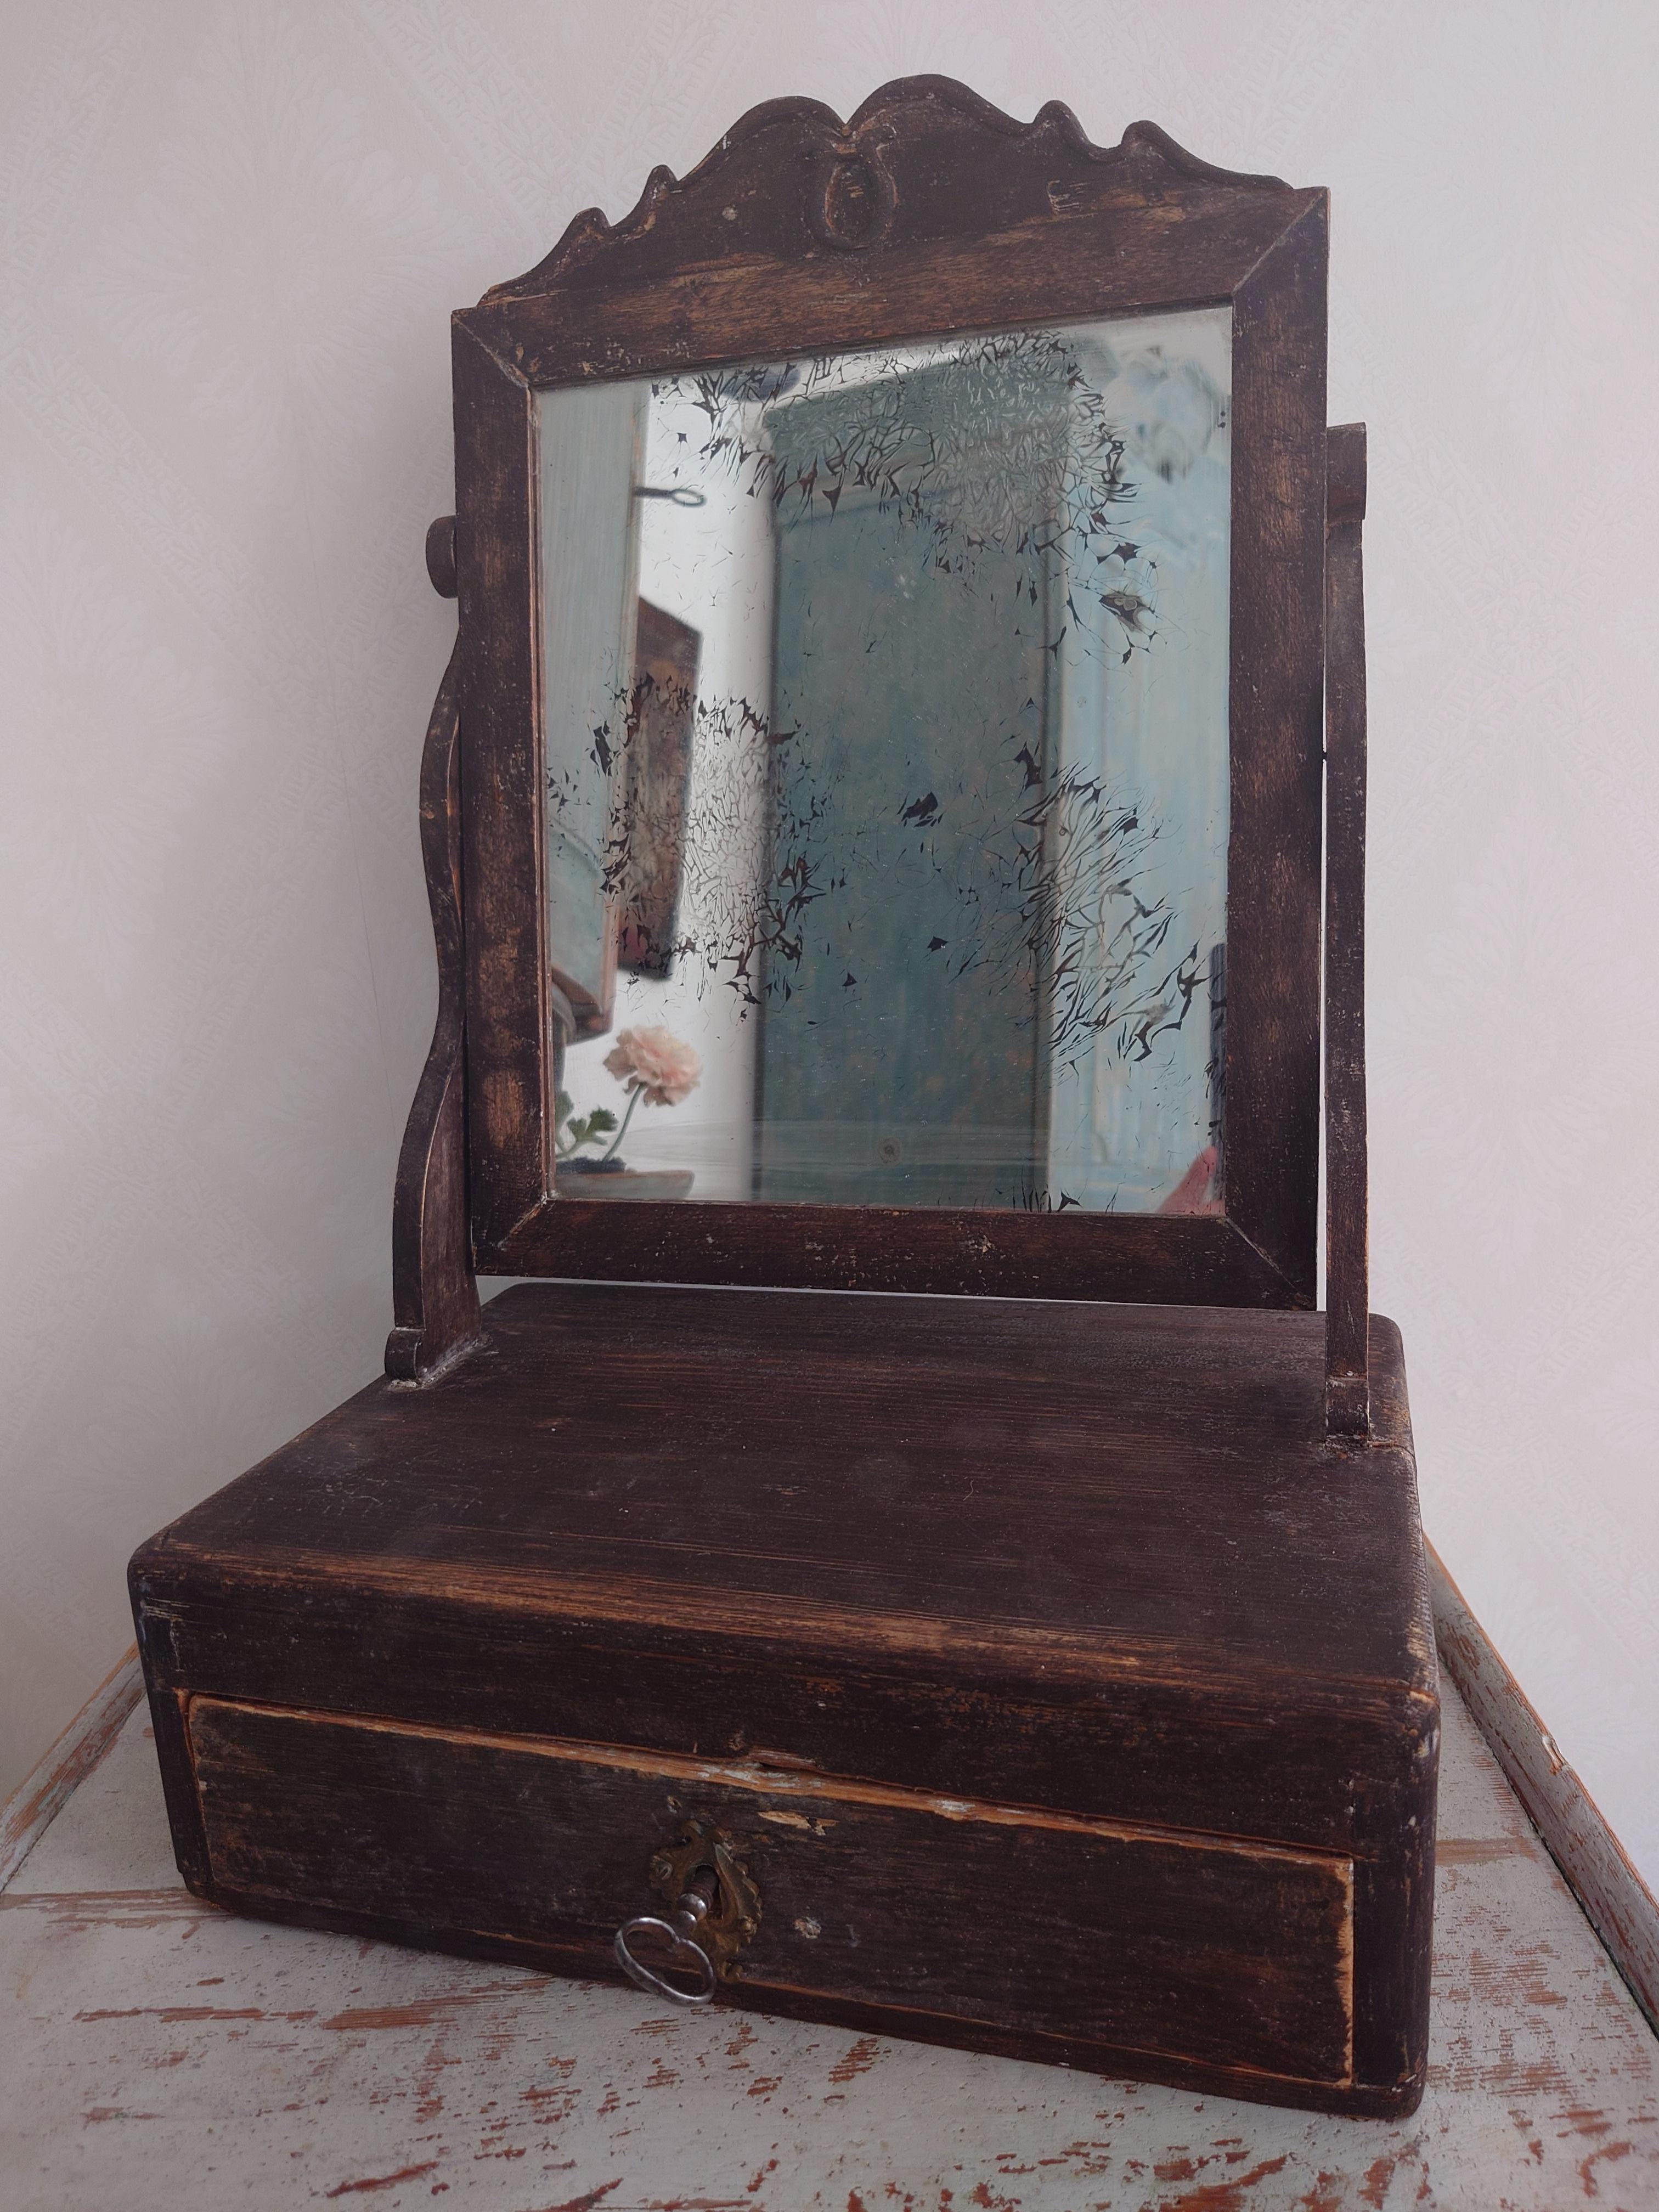 Empire 19th Century Antique Rustic Swedish Original Painted Table Mirror Dated, 1870 For Sale